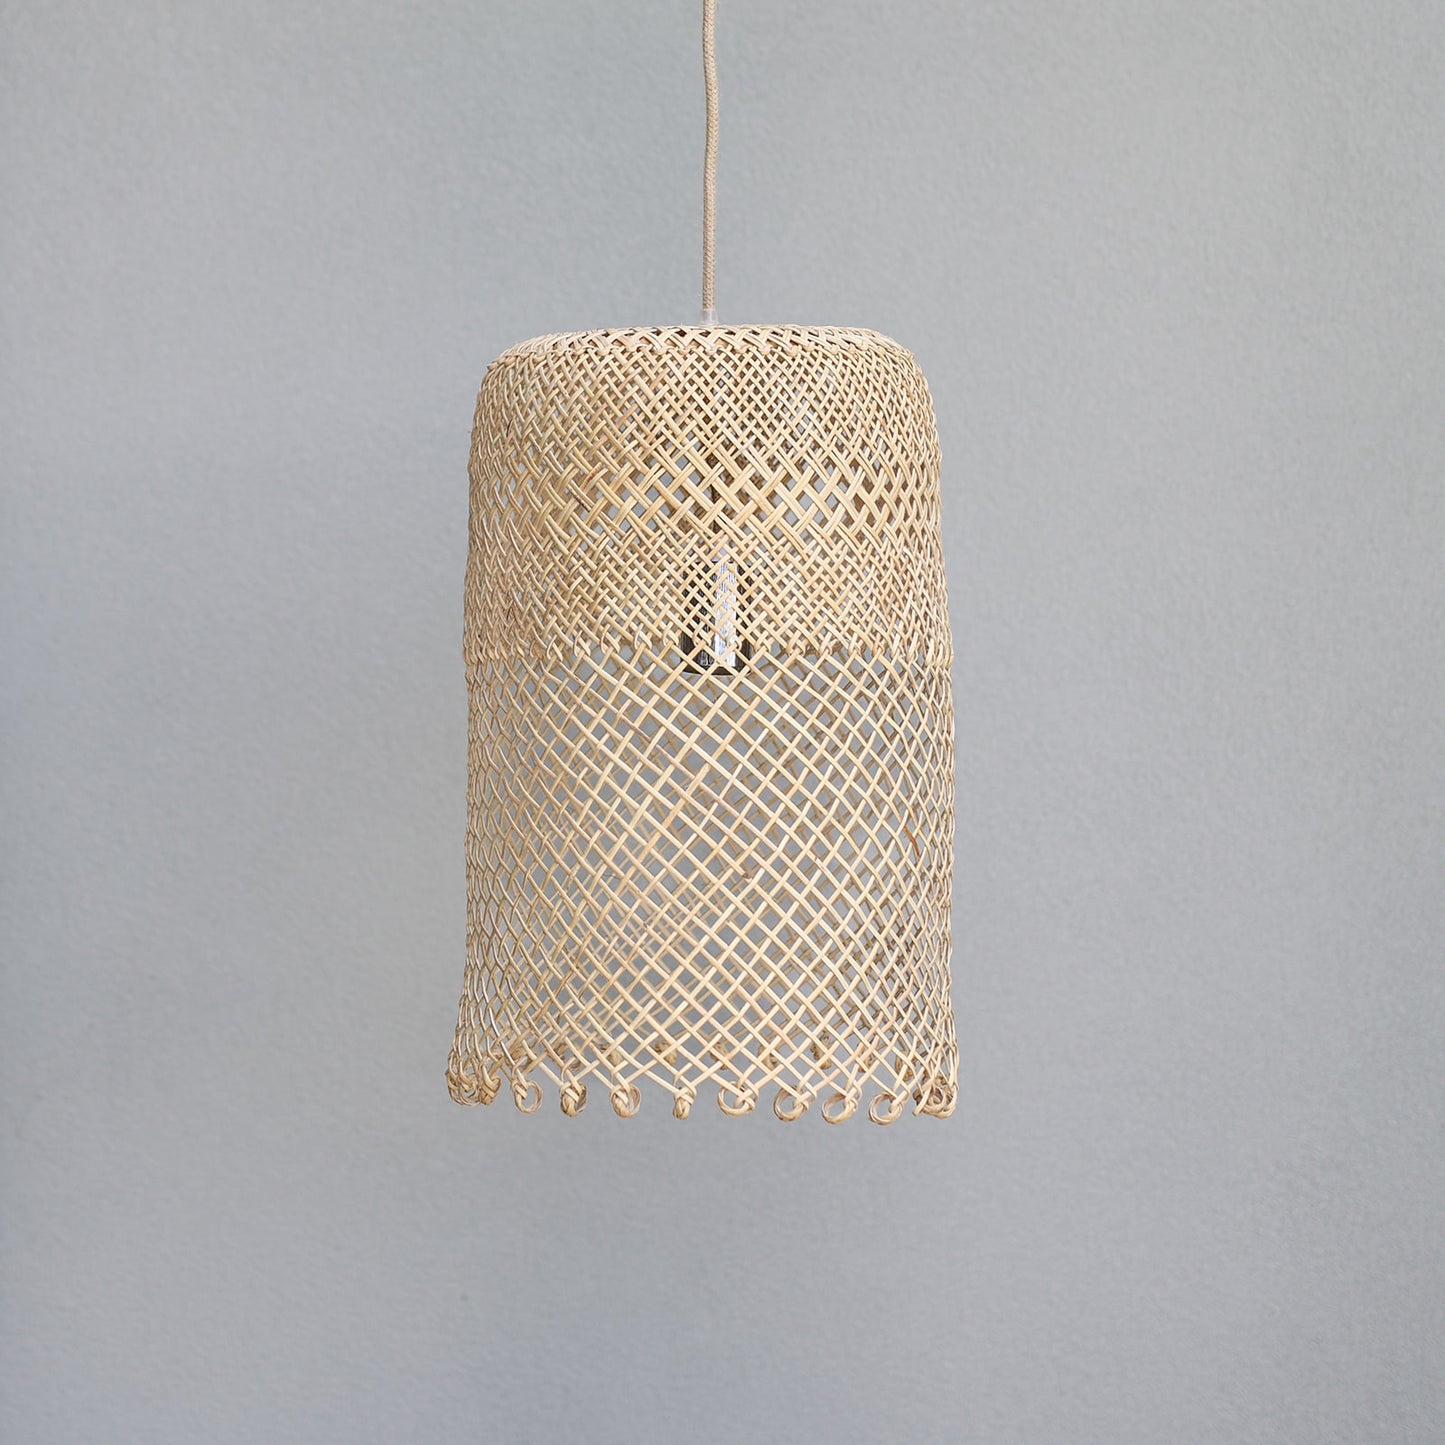 photo-of-Natural-coastal-boho-style-lighting-showing-a-medium-borneo-basket-light-shade-with-open-weave-and-ring-detail-at-the-bottom